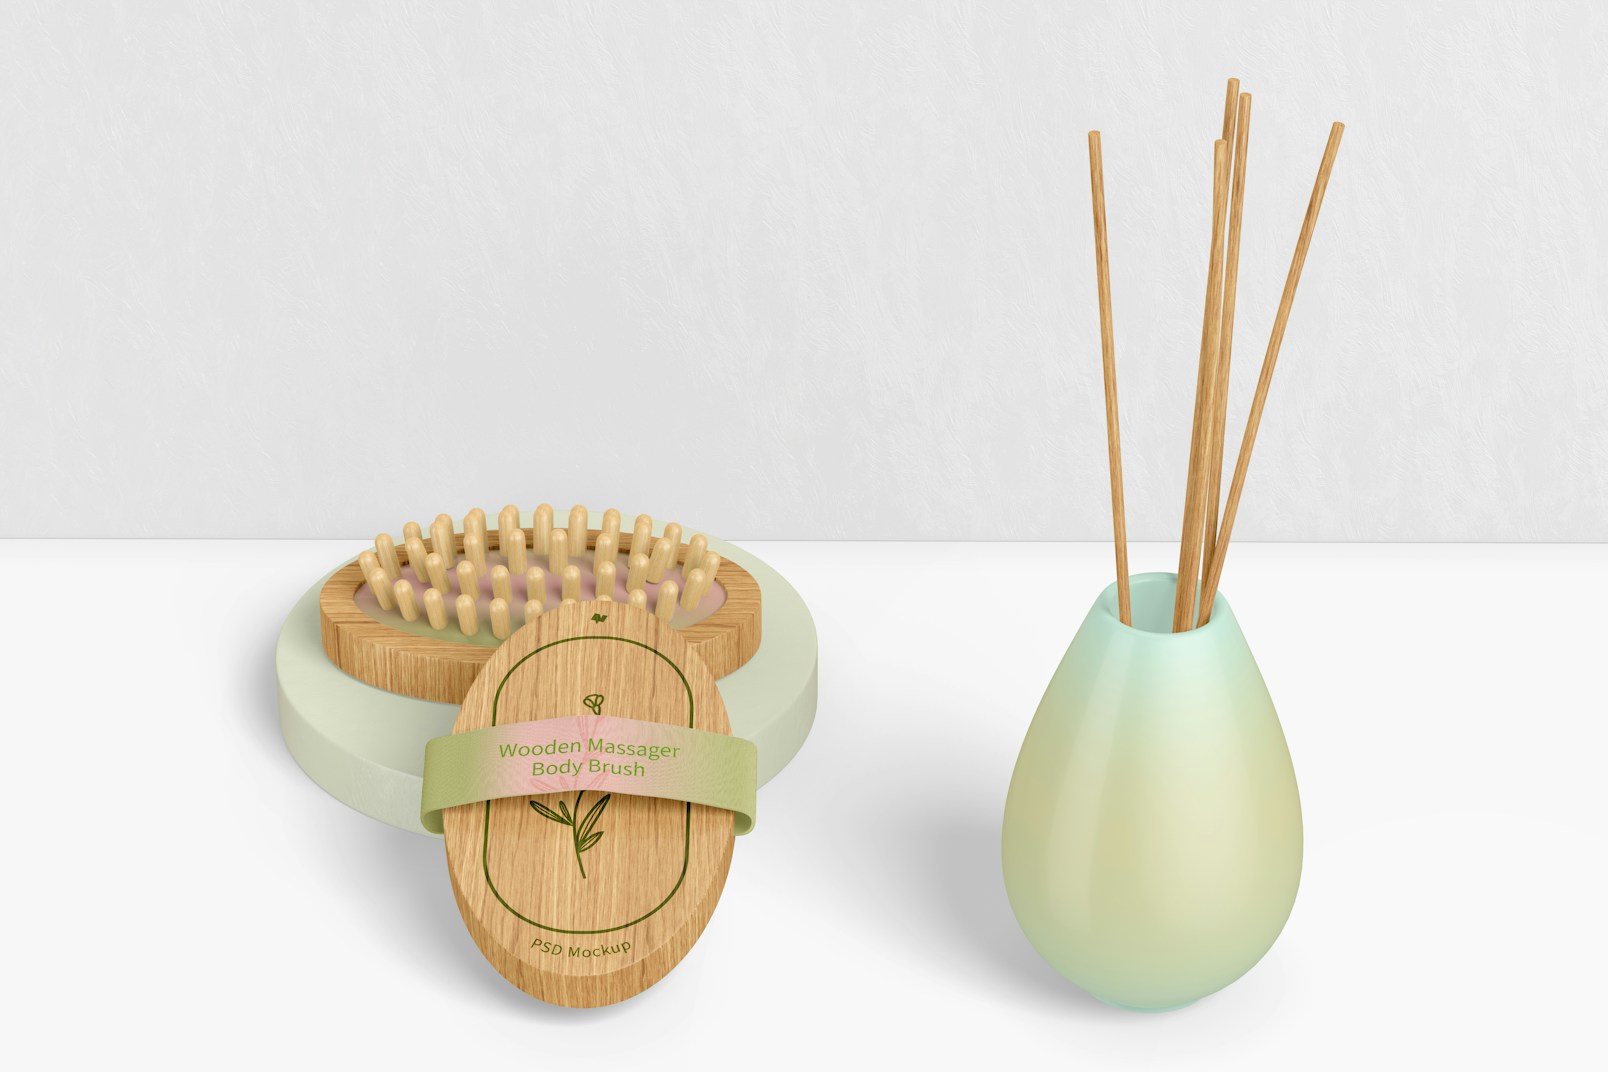 Wooden Massager Body Brushes Mockup, Dropped and Leaned